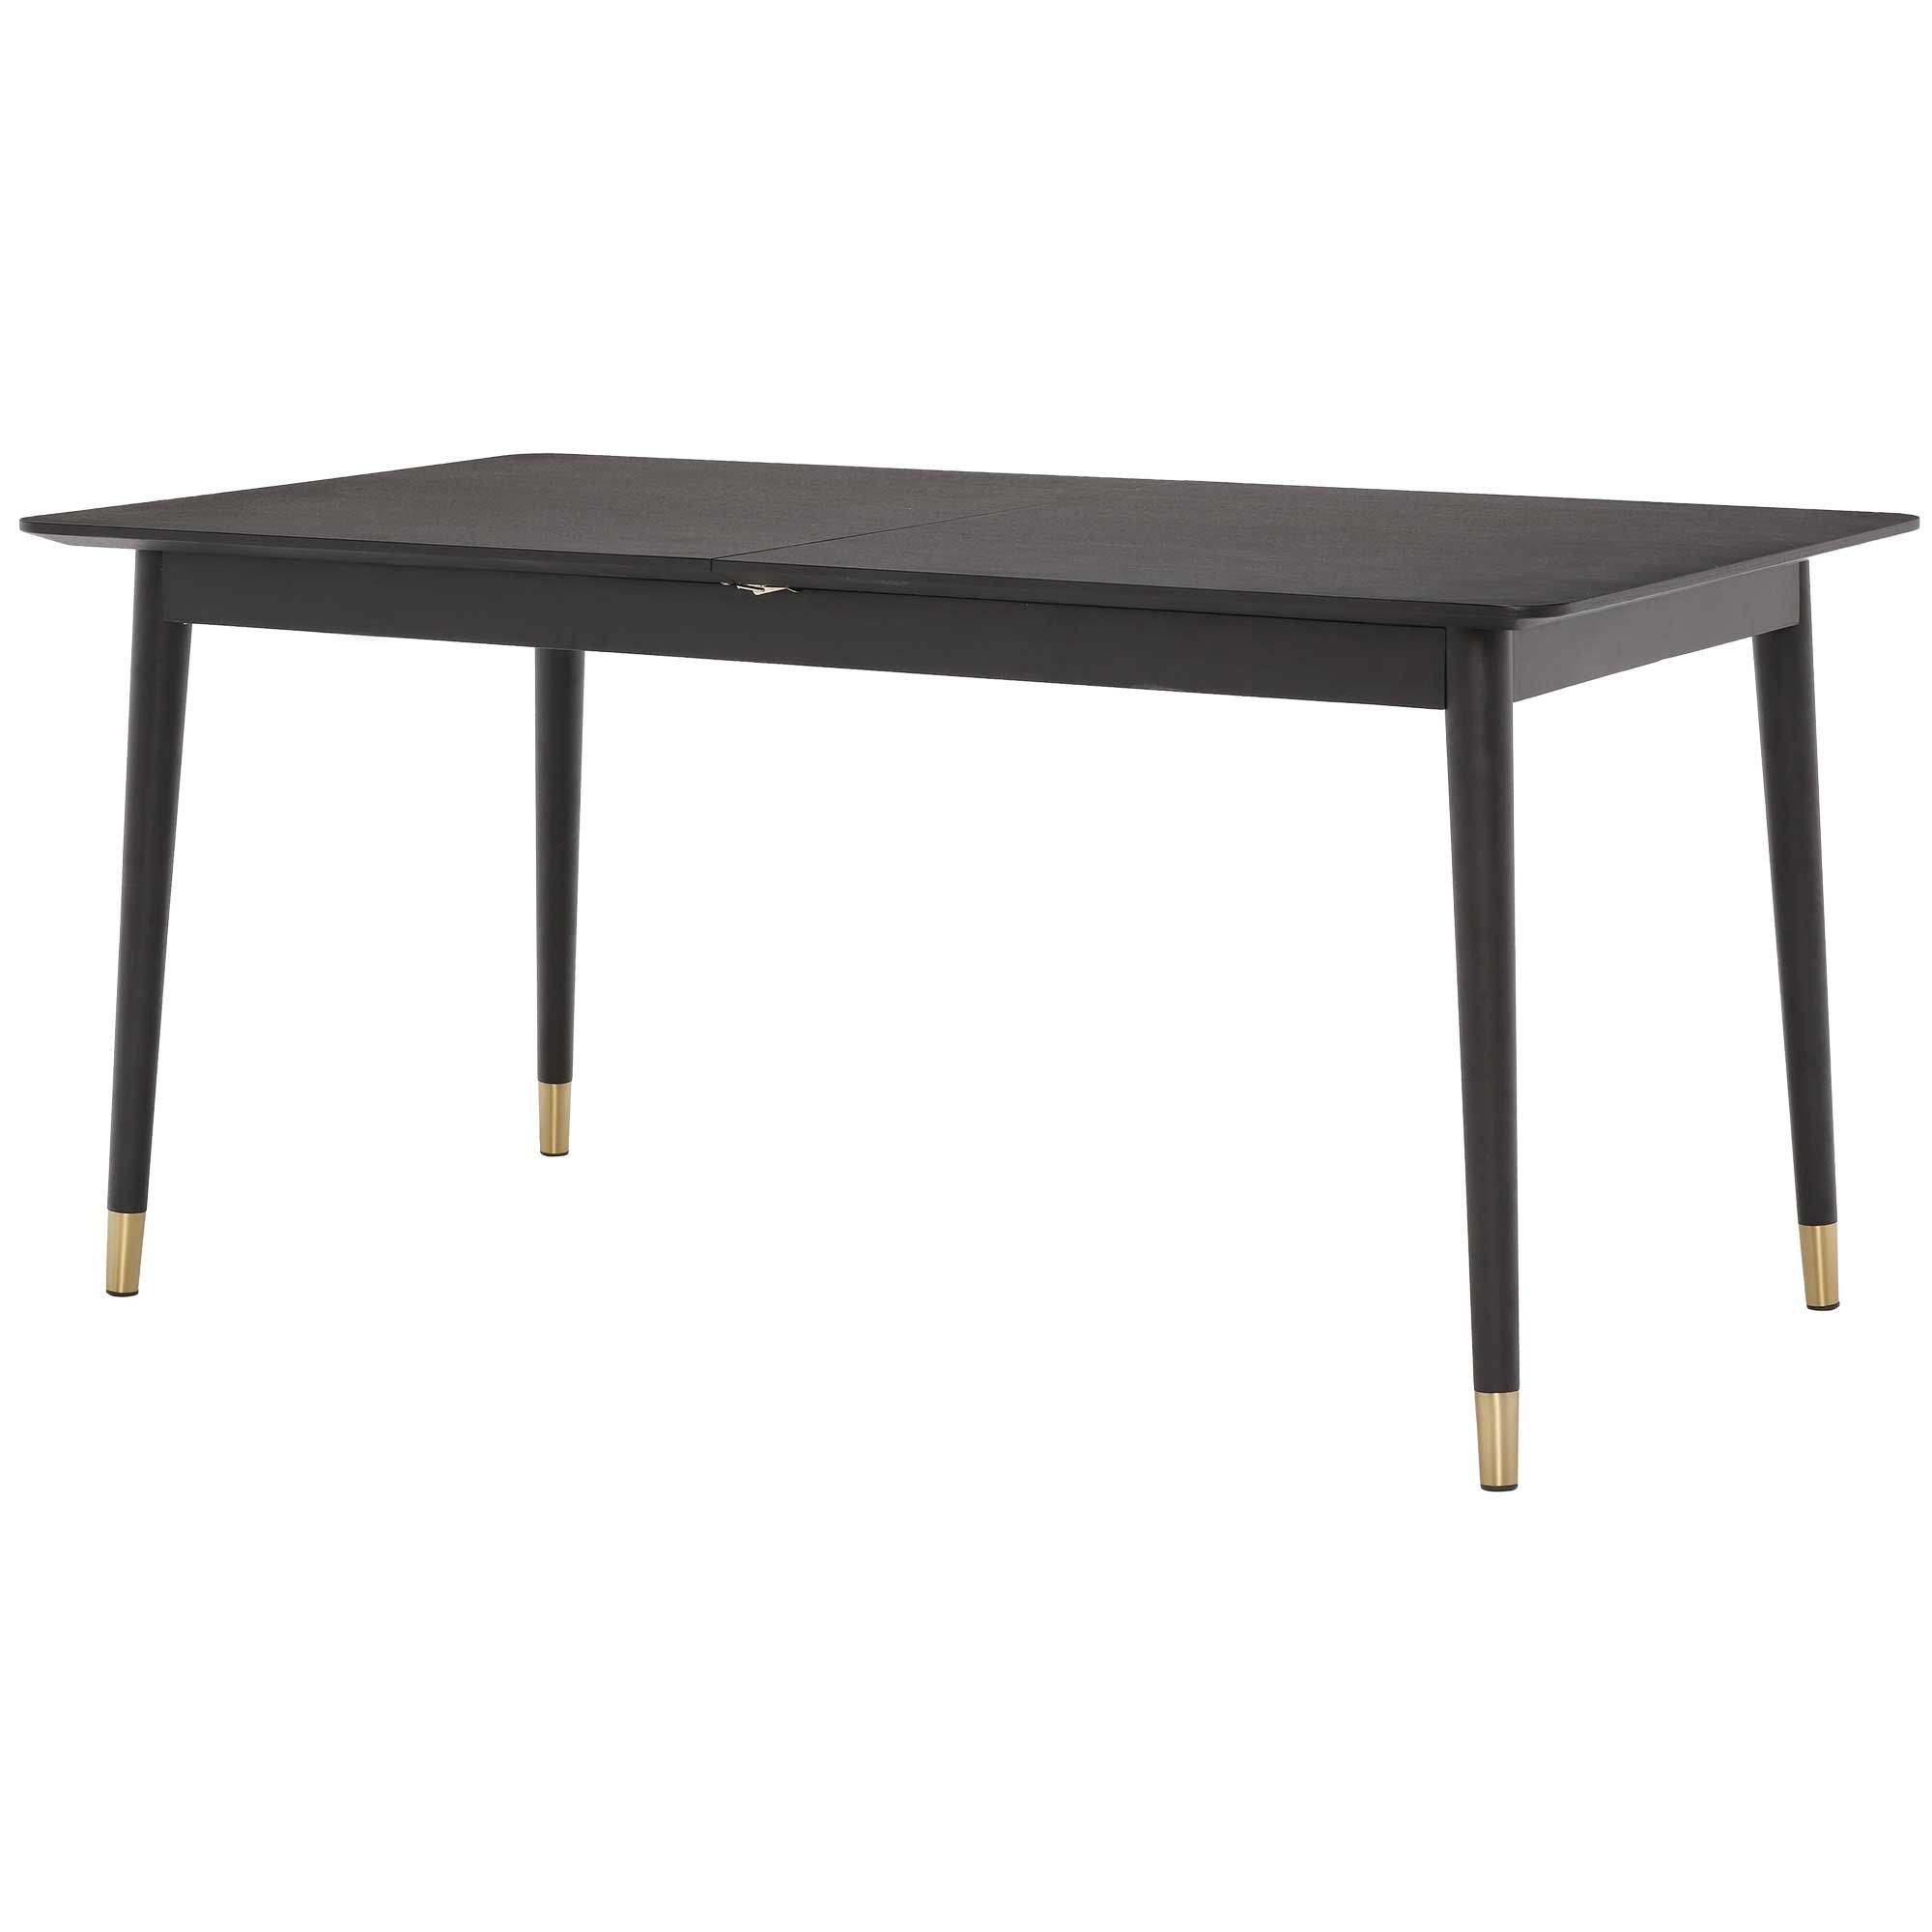 Most Recently Released Black Extending Dining Tables Intended For Cannelle Extending Dining Table, Black Ash With Black And Gold Leg (View 12 of 25)